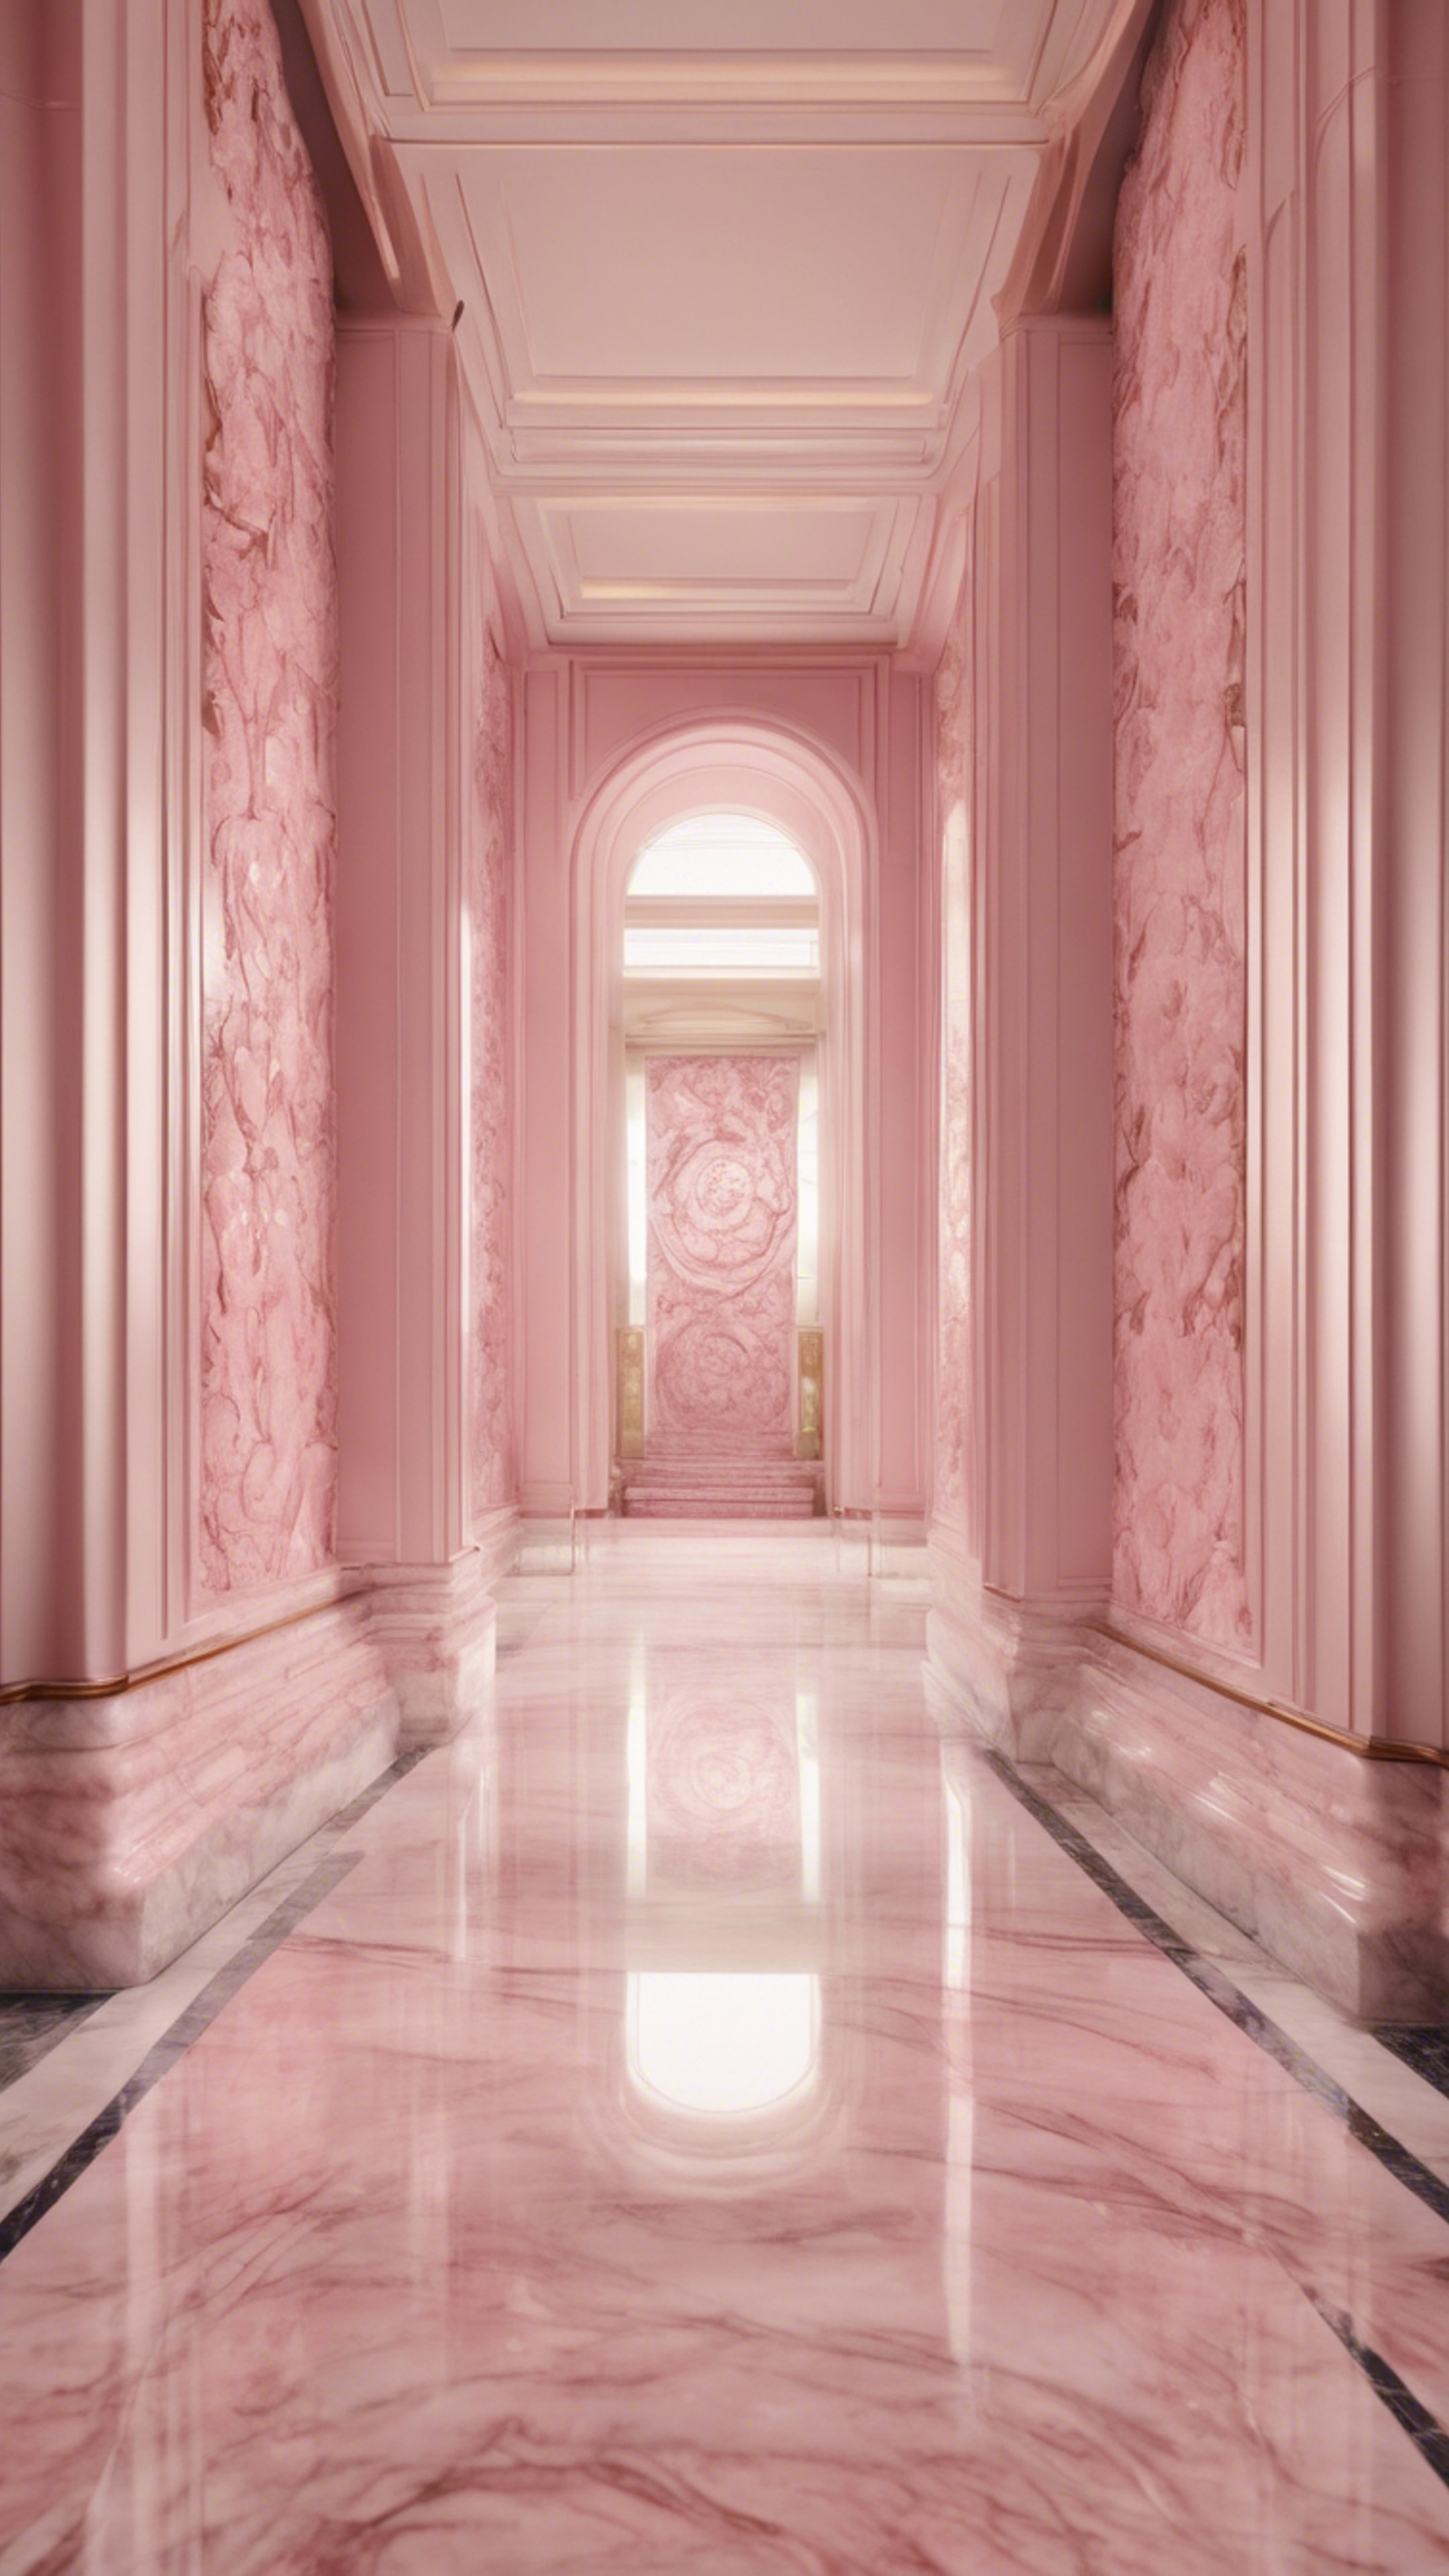 An ornate floral pattern etched in a pale pink marble surface, adding sophistication to a classy hallway.壁紙[dc6b1897a89c40378456]